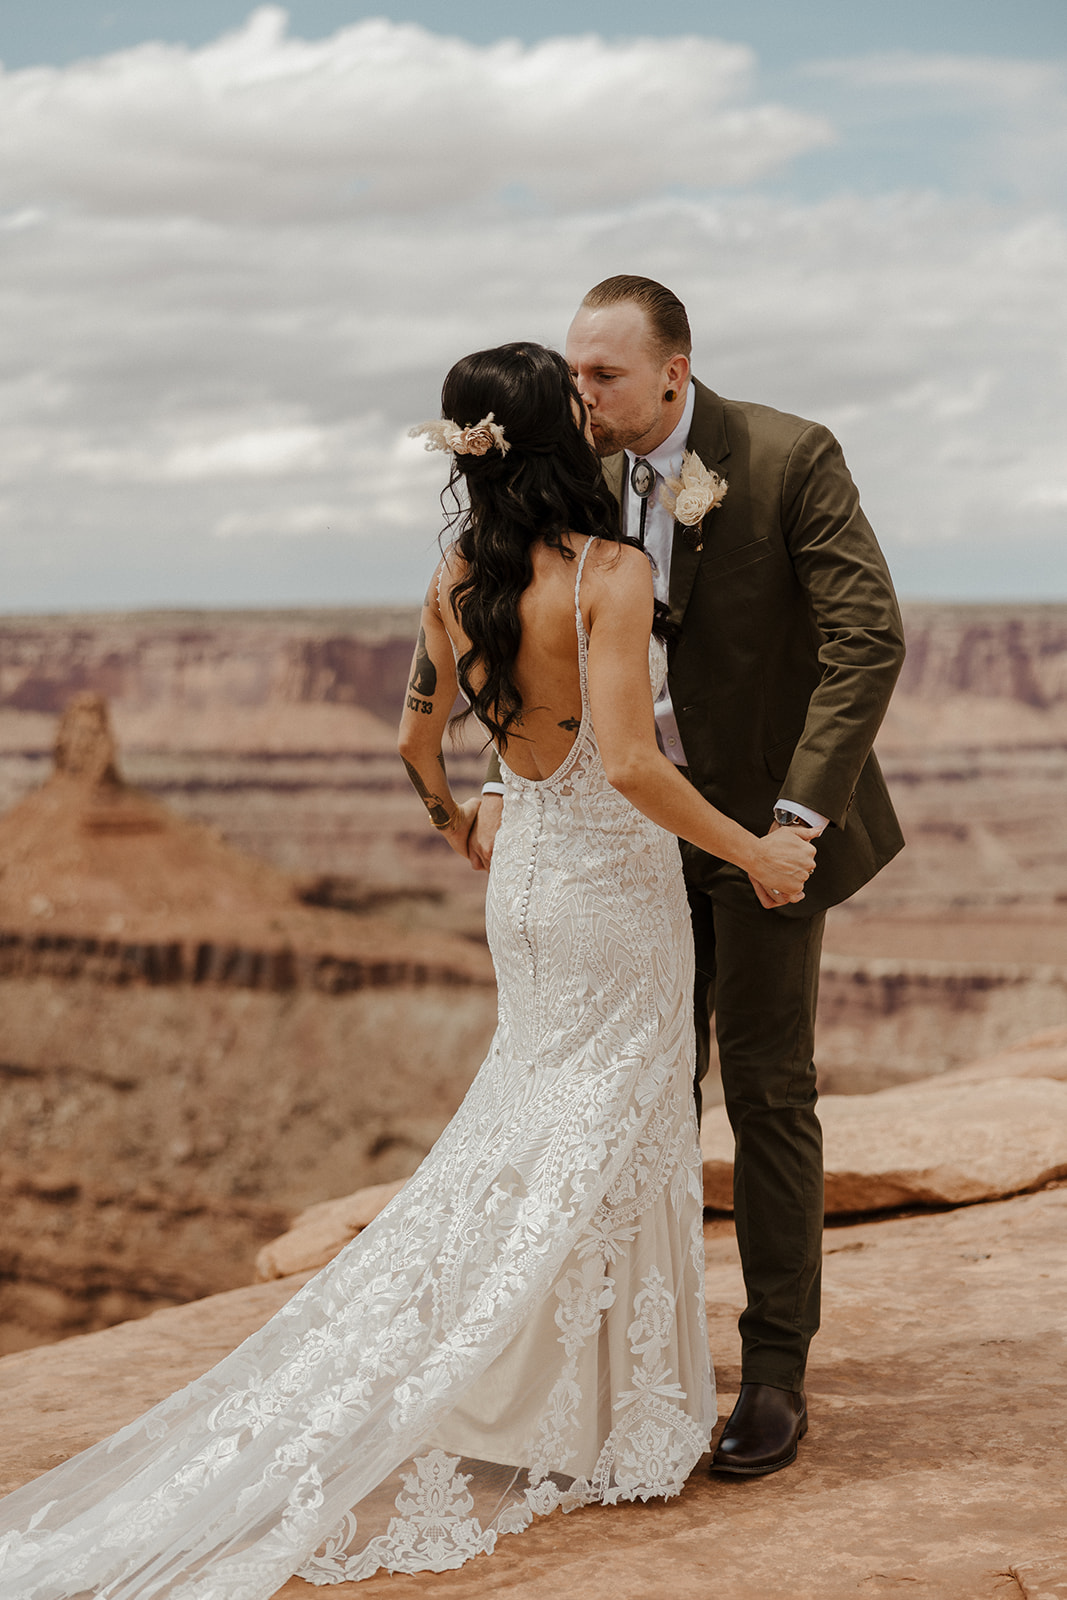 beautiful bride and groom share a kiss with the stunning Arizona nature in the background after their dreamy wedding at the red earth venue in Arizona!